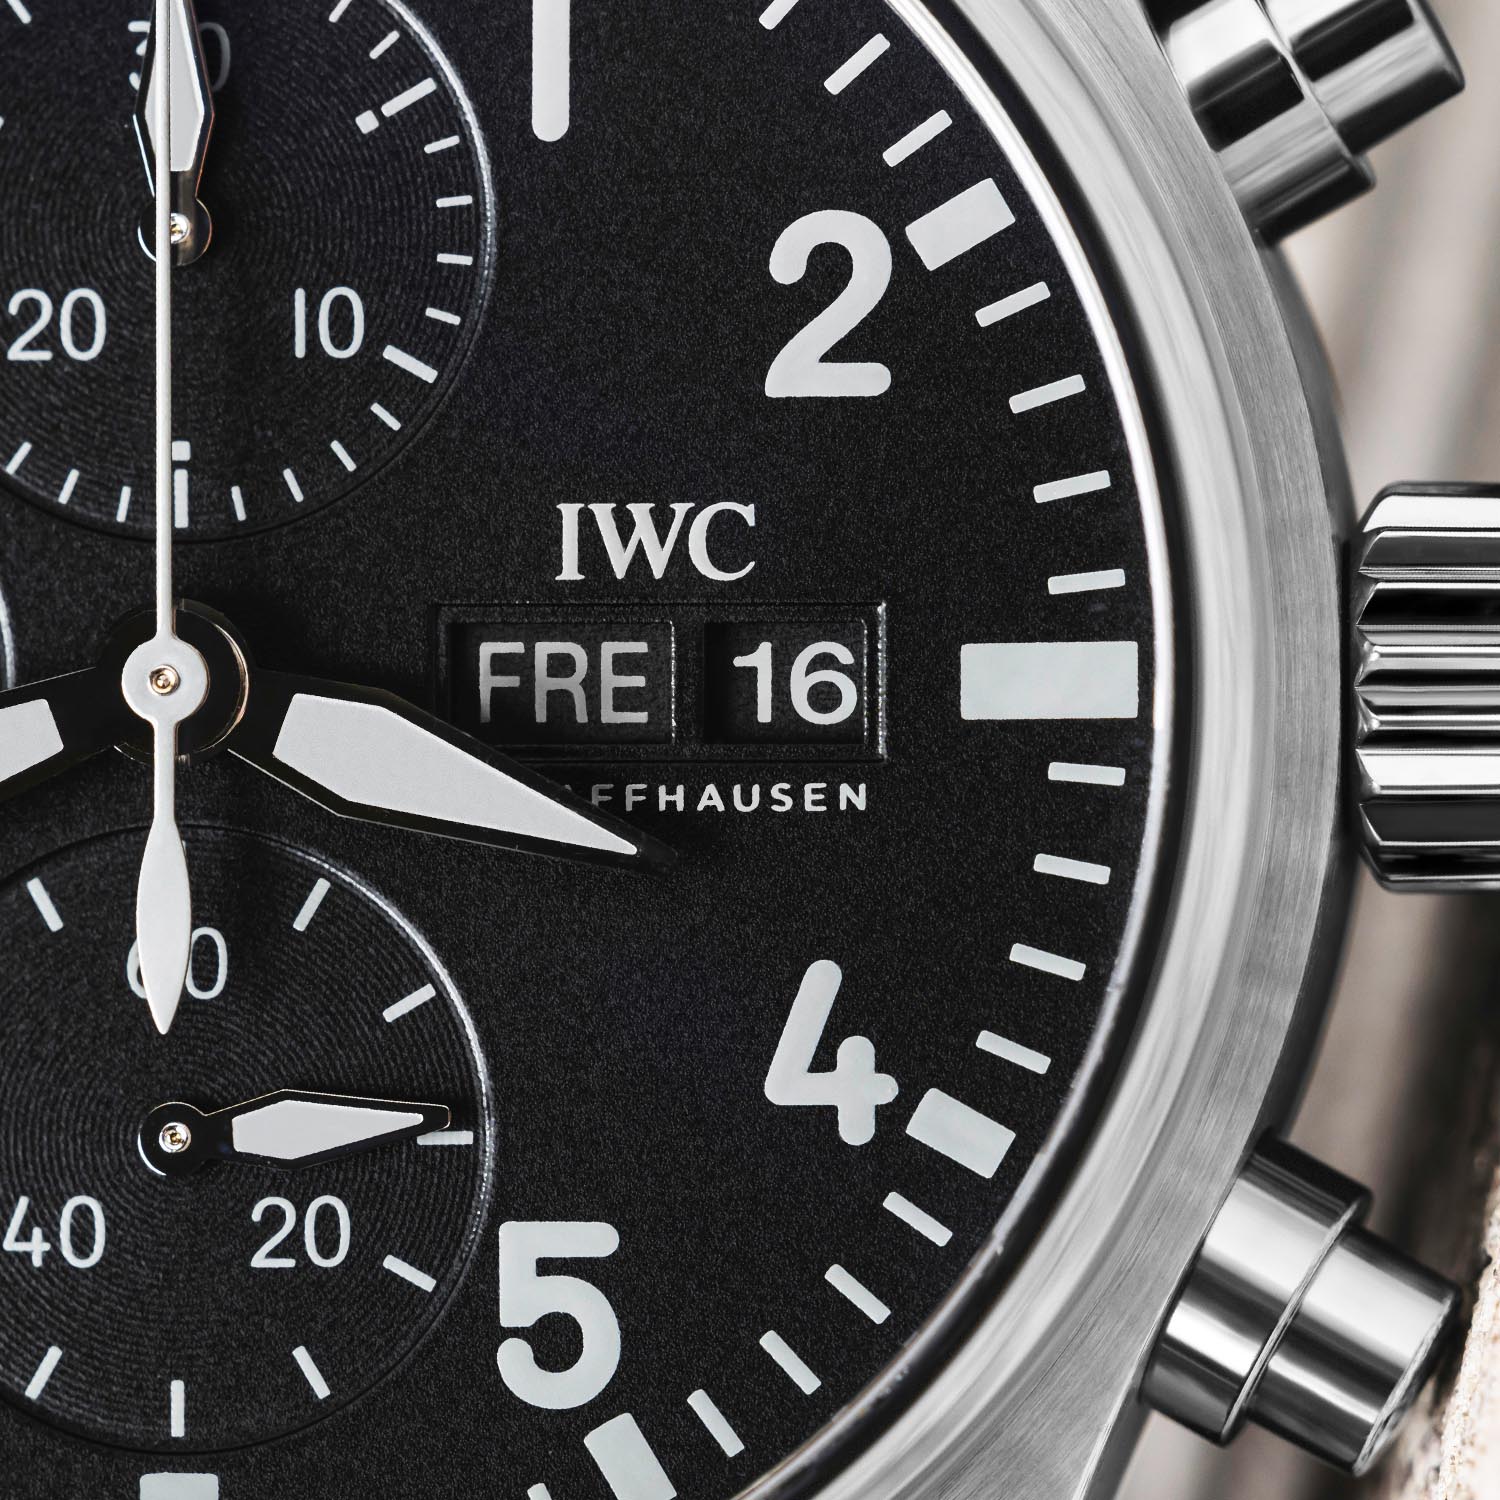 IWC Pilot’s Chronograph C.03 for Collective